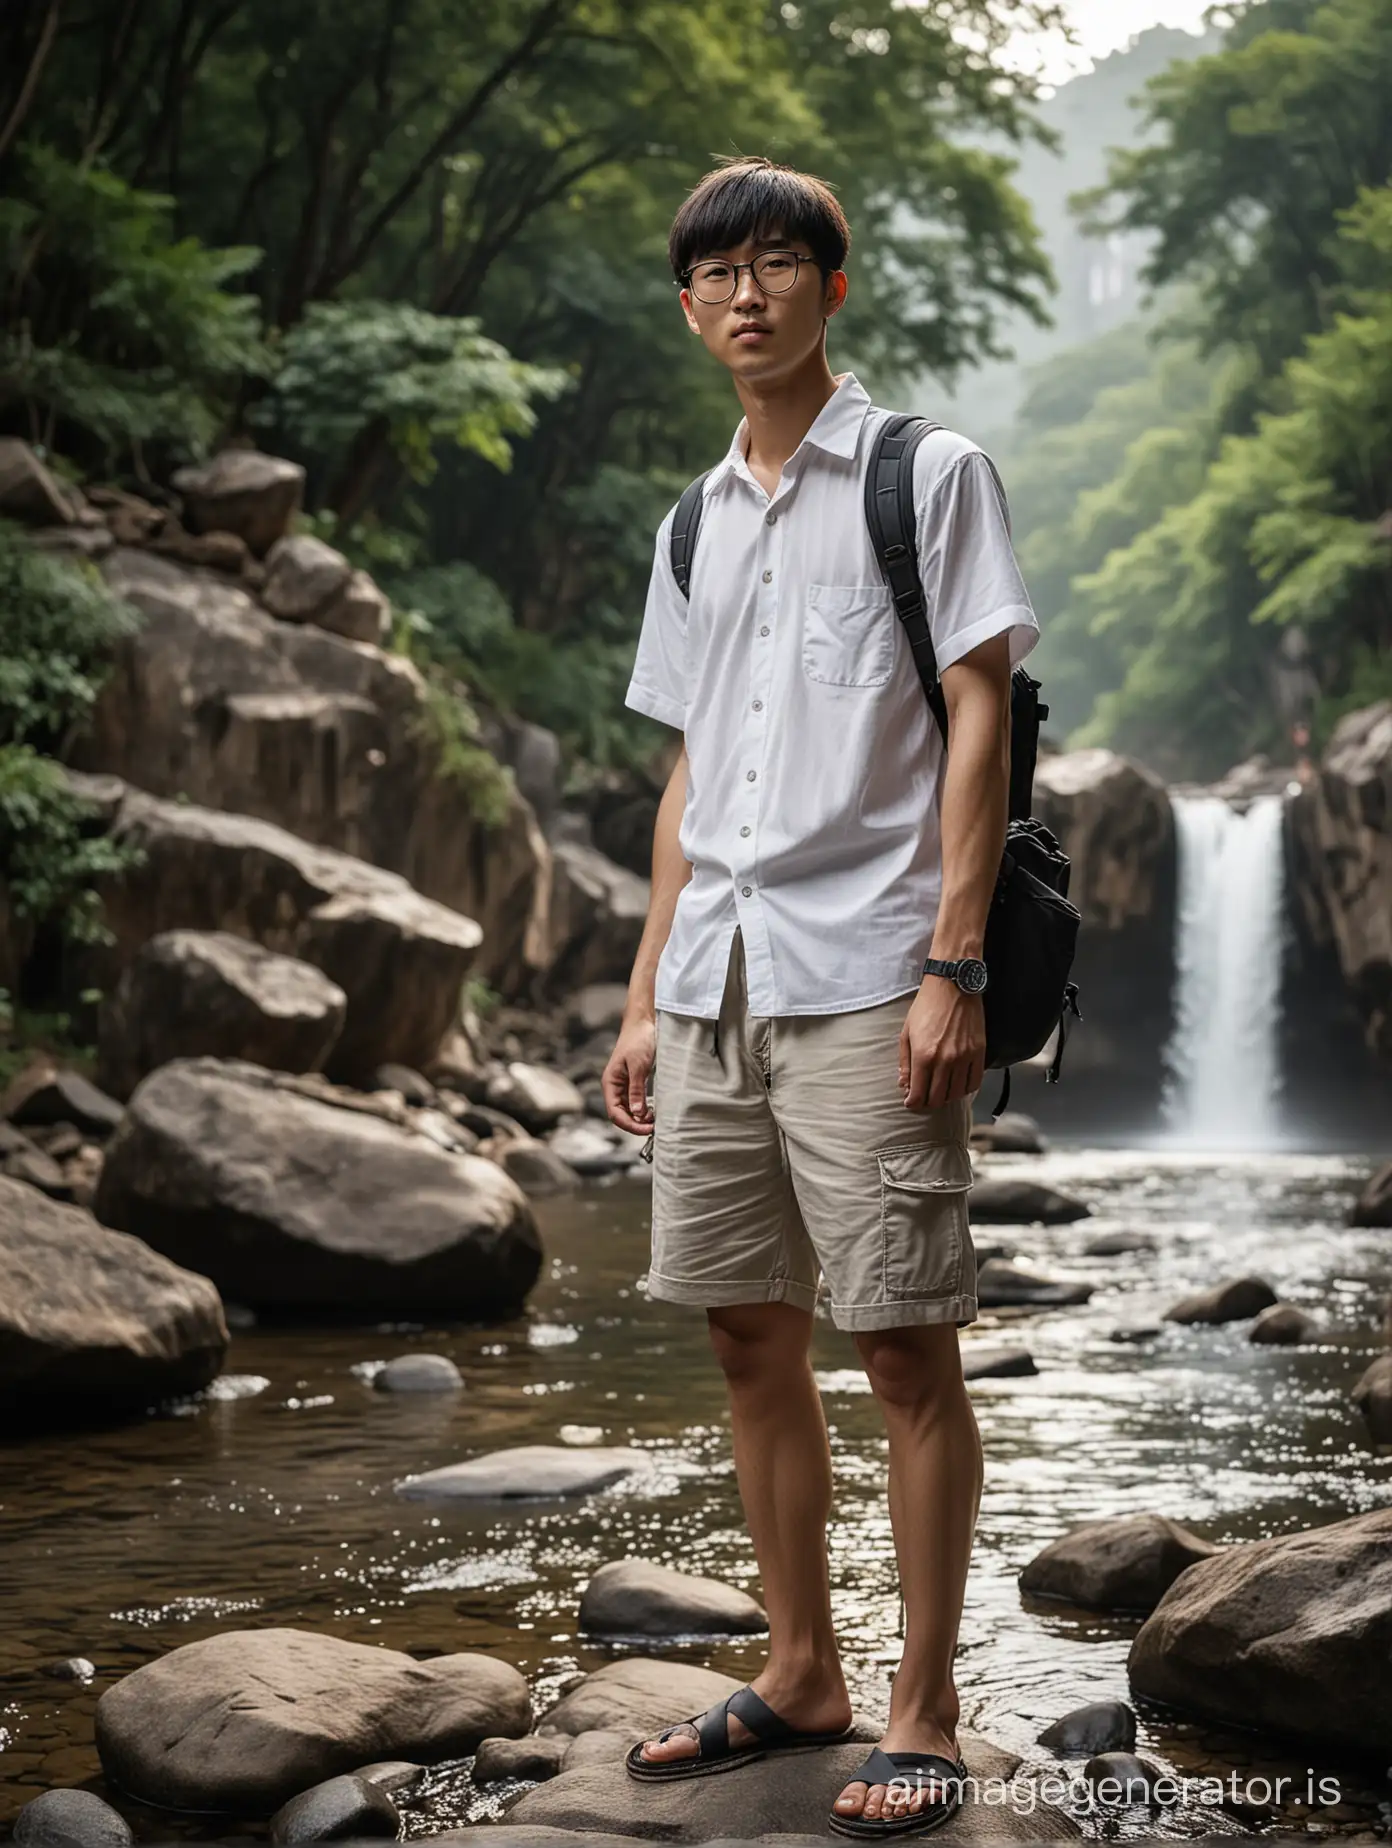 dynamic portrait, long shot, a Korean man with bowl cut hair wearing a plain white shirt and shorts, wearing black glasses, standing barefoot, carrying a Fuji XT30 camera and backpack, daydreaming on rocks with a small river flowing clear, bokeh background with a natural waterfall, refracted sunlight behind him at dusk, cinematic images, professional photography, dynamic lighting, faces looking at the camera